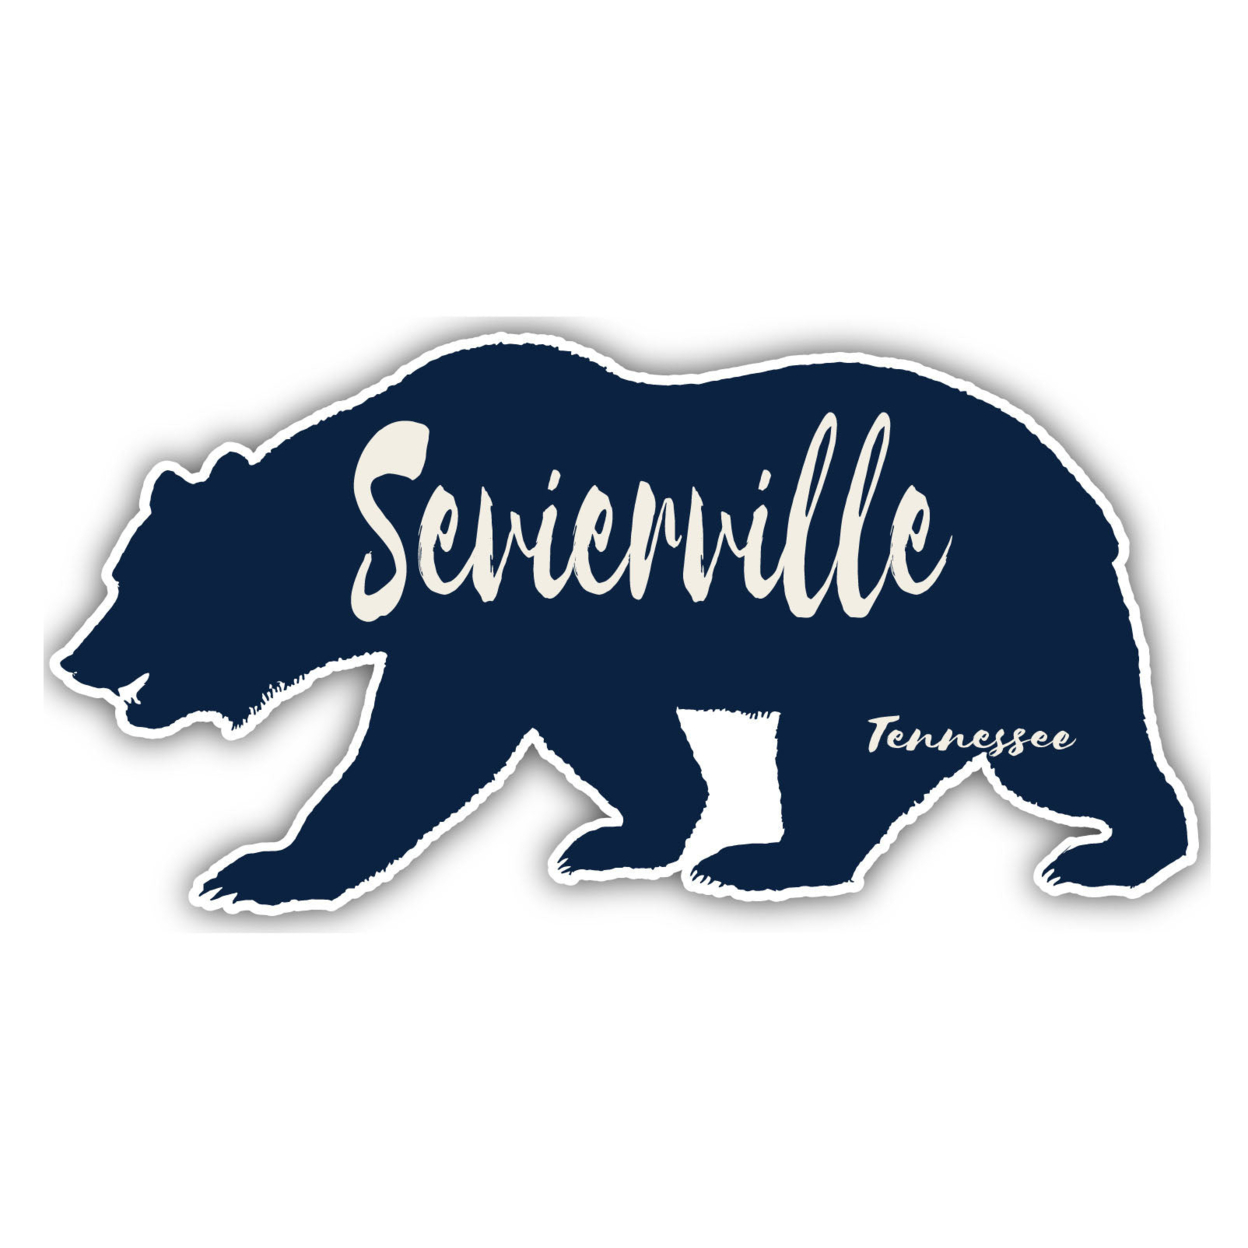 Sevierville Tennessee Souvenir Decorative Stickers (Choose Theme And Size) - Single Unit, 4-Inch, Tent